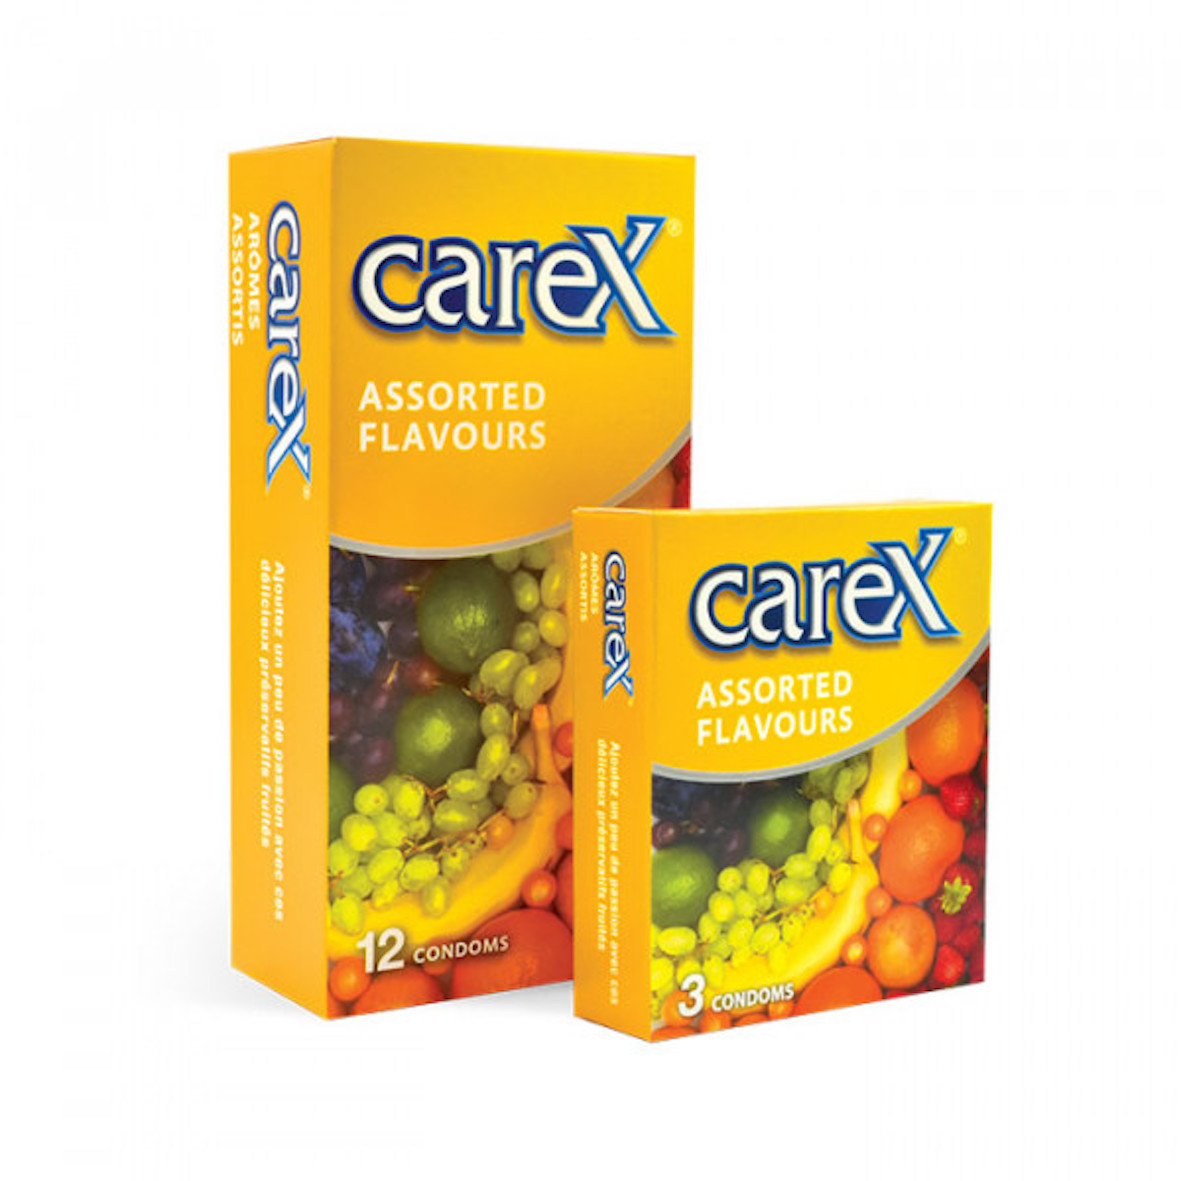 Carex Assorted Flavour Yellow Condom 12 Pieces Wholesale Tradeling 5866